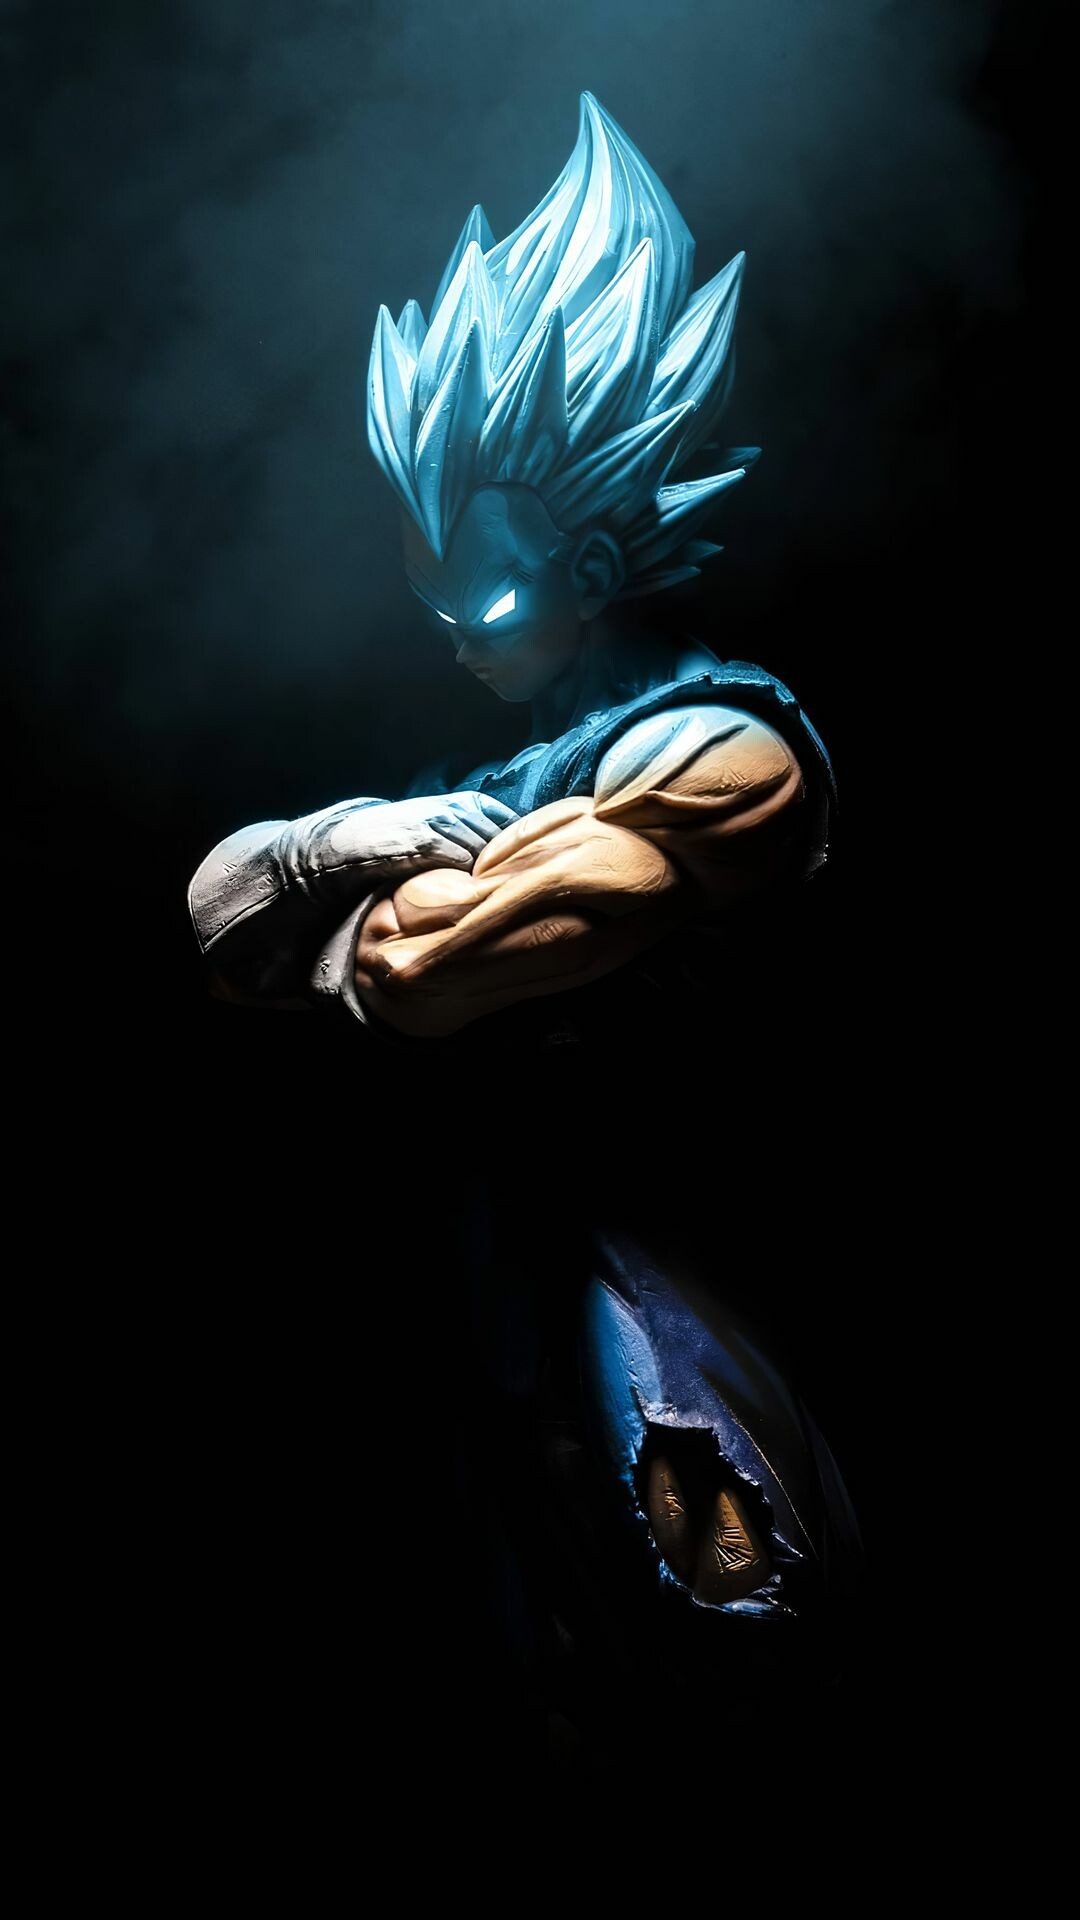 Dragon Ball Z: Vegeta, The prince of an extraterrestrial warrior race known as the Saiyans. 1080x1920 Full HD Background.